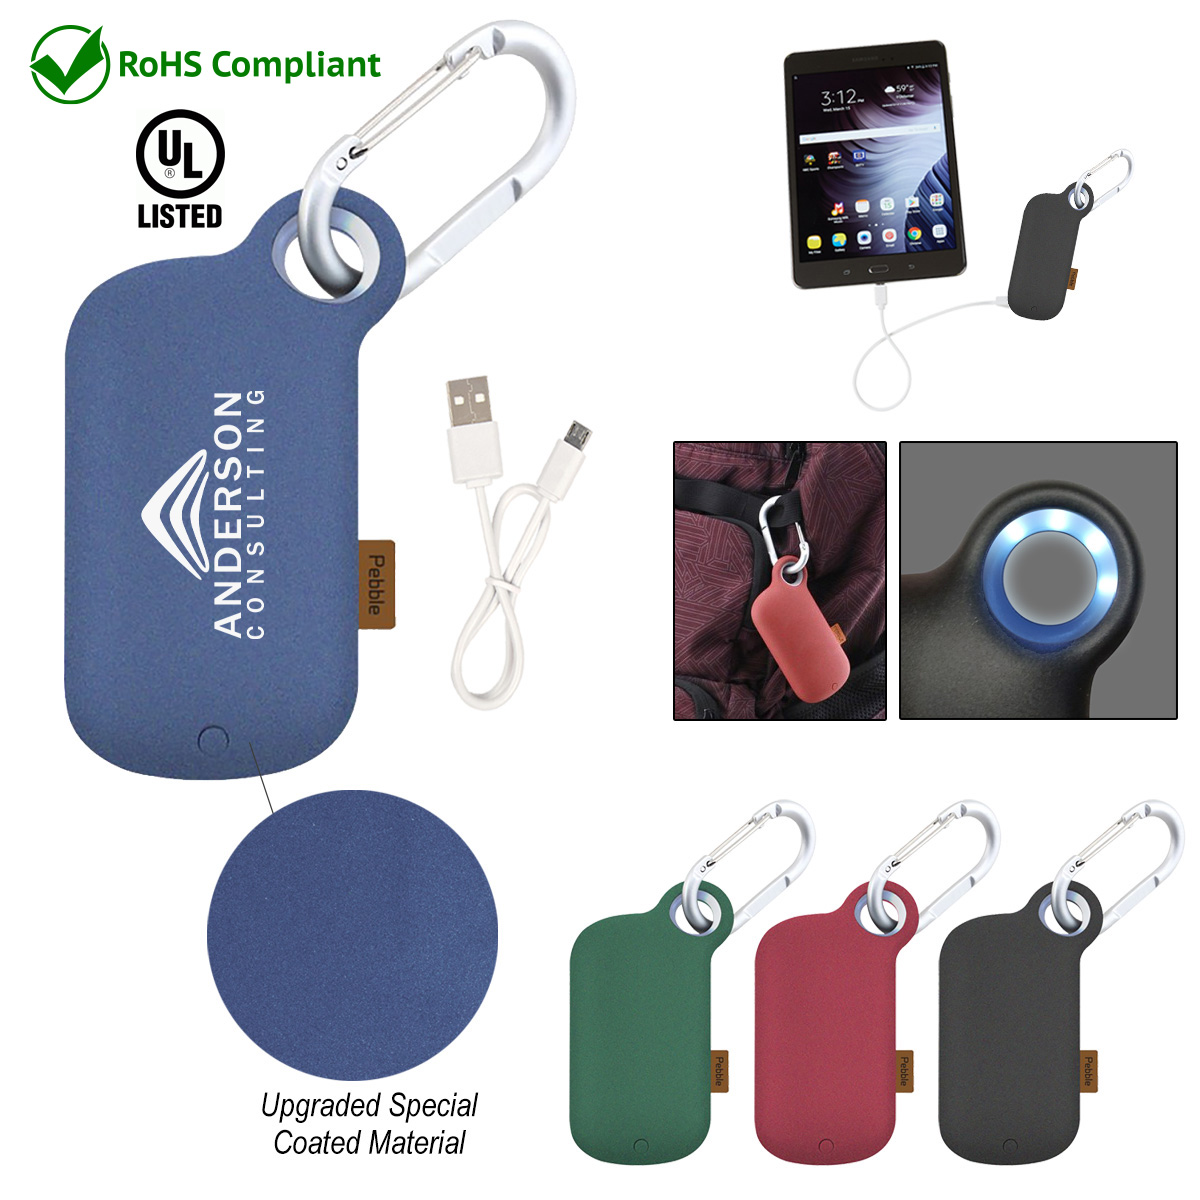 UL Listed Carabiner Power Bank Promotional Power Banks